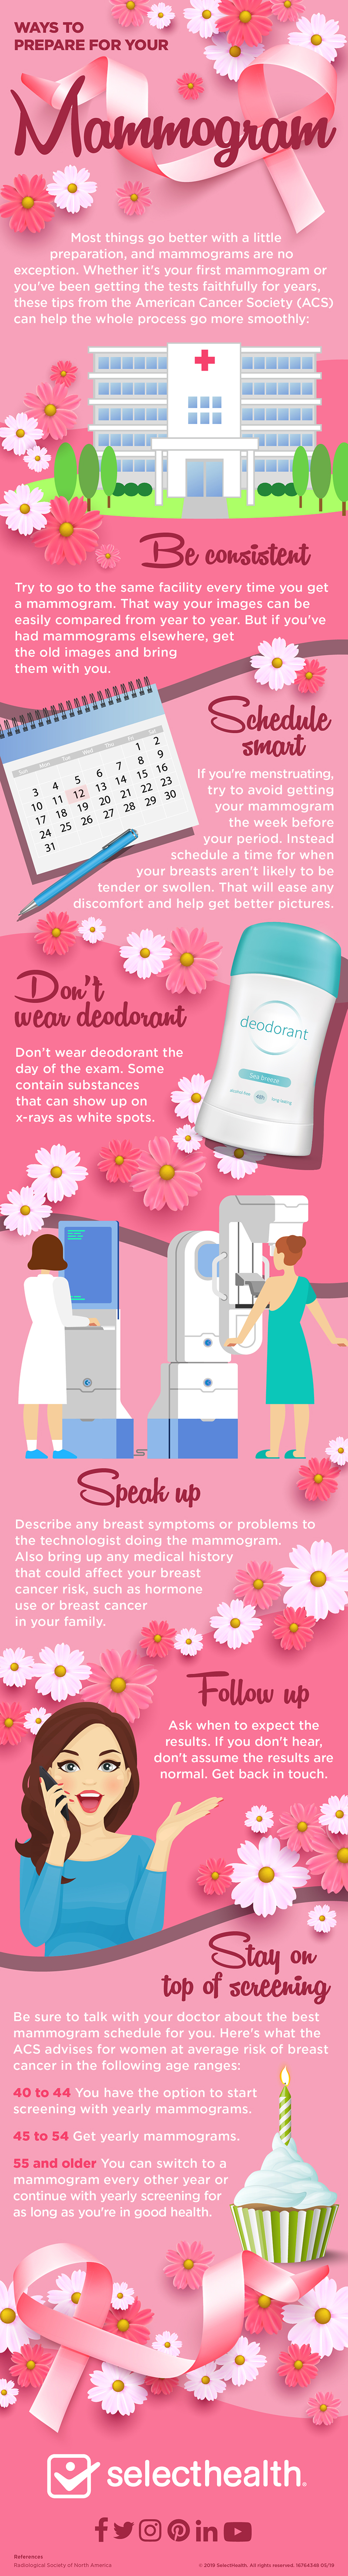 How to prepare for a mammogram infographic, Lg